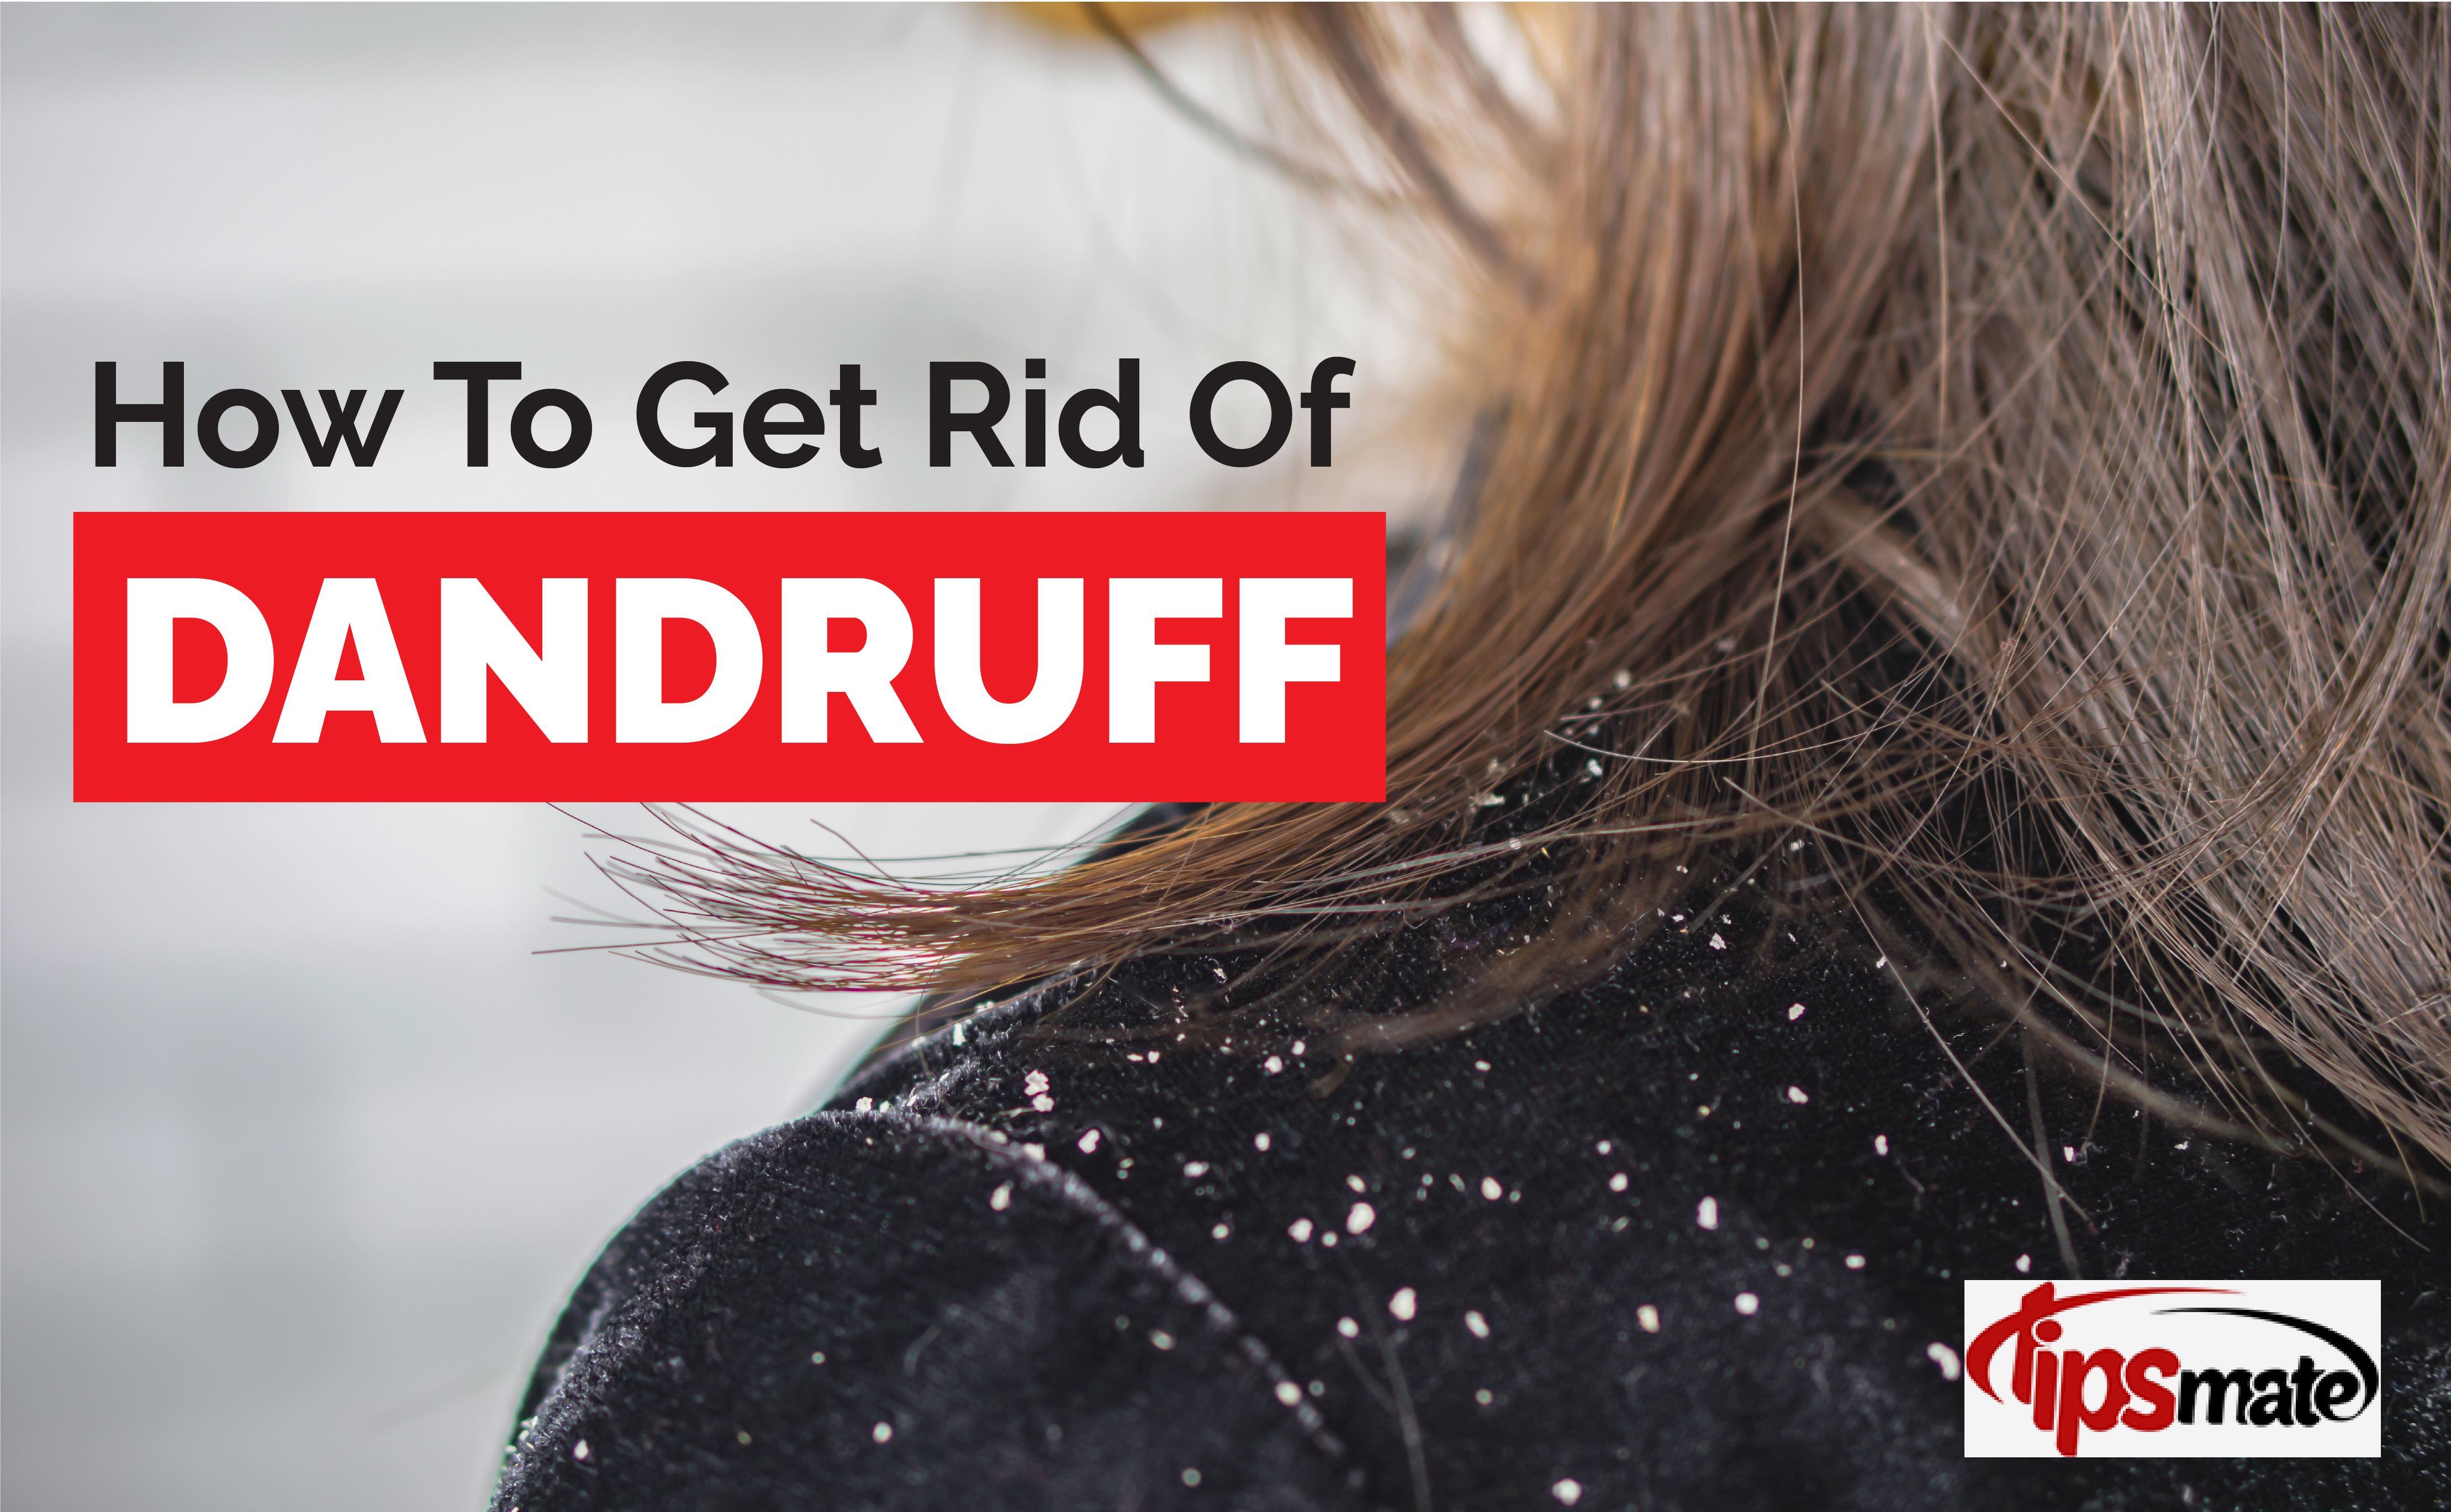 How To Get Rid Of Dandruff